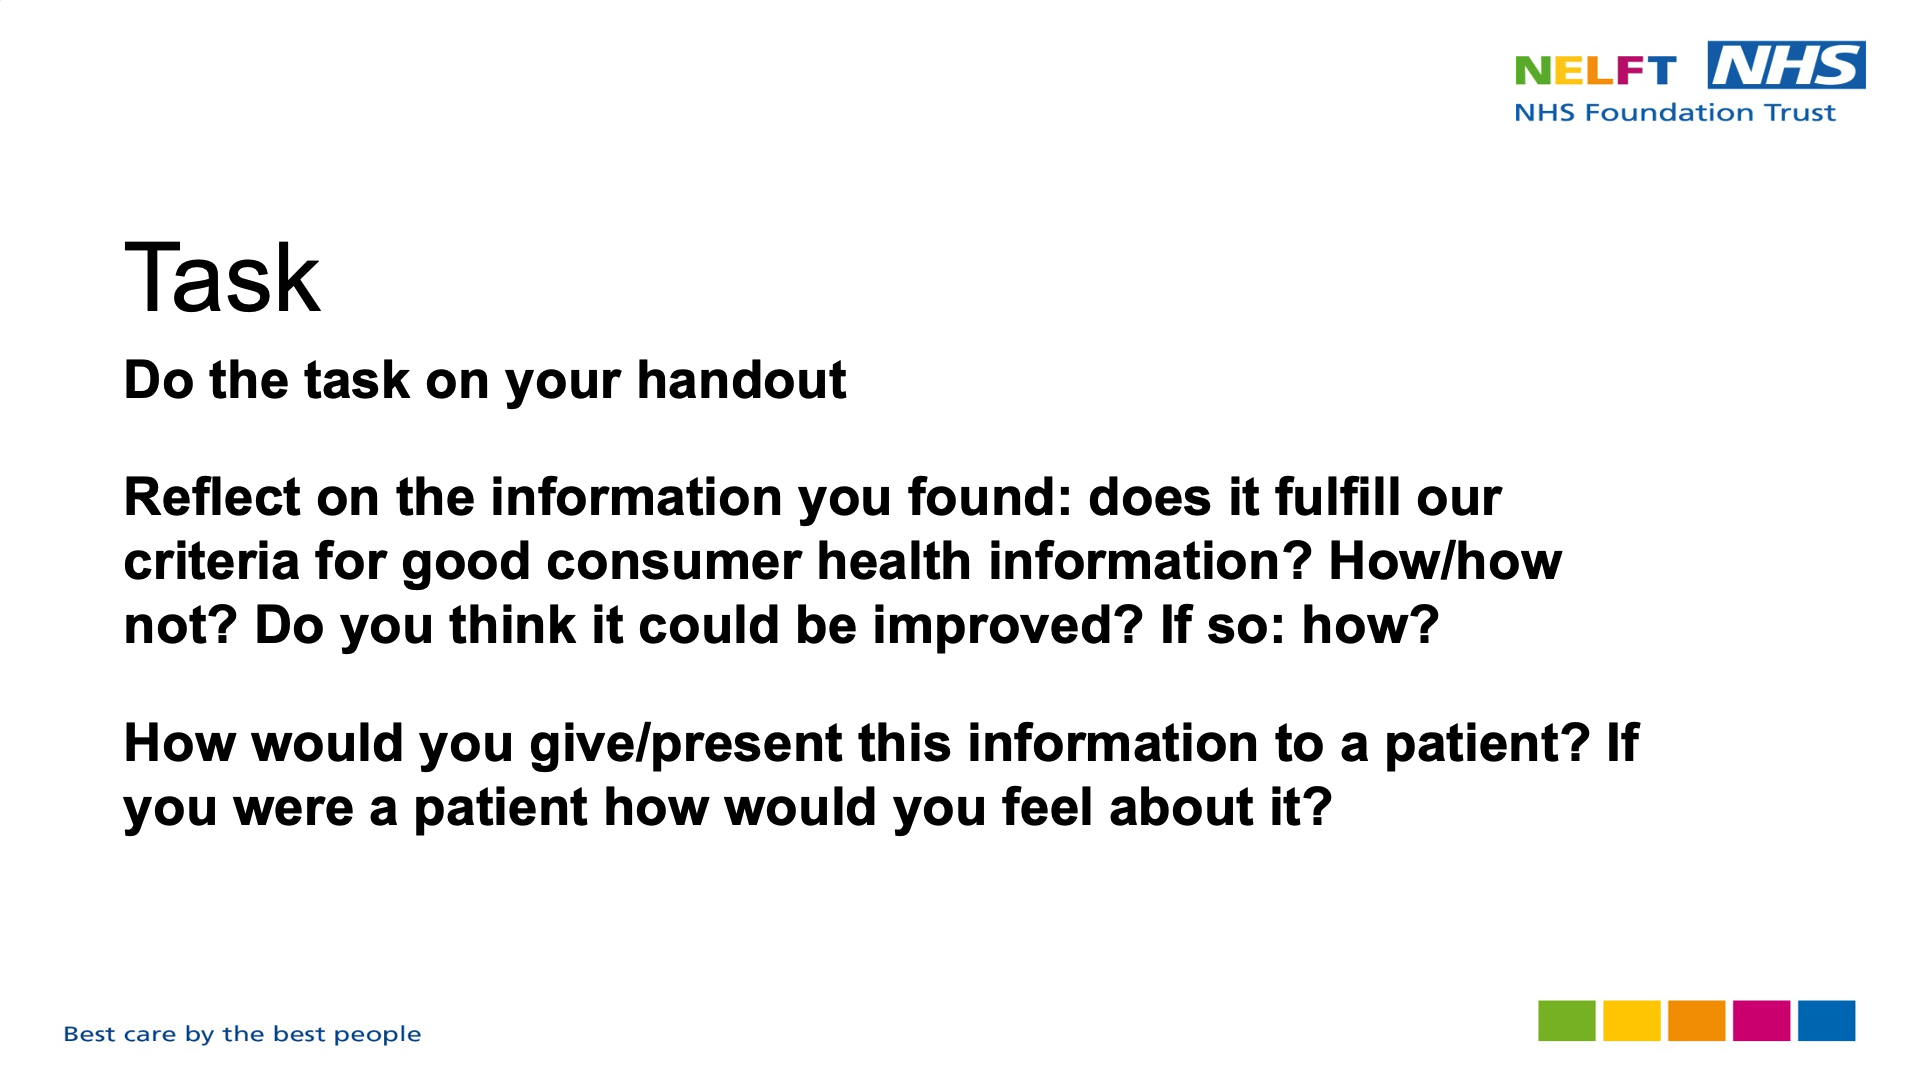 Title: Task. Text on page: Do the task on your handout Reflect on the information you found: does it fulfill our criteria for good consumer health information? How/how not? Do you think it could be improved? If so: how? How would you give/present this information to a patient? If you were a patient how would you feel about it?